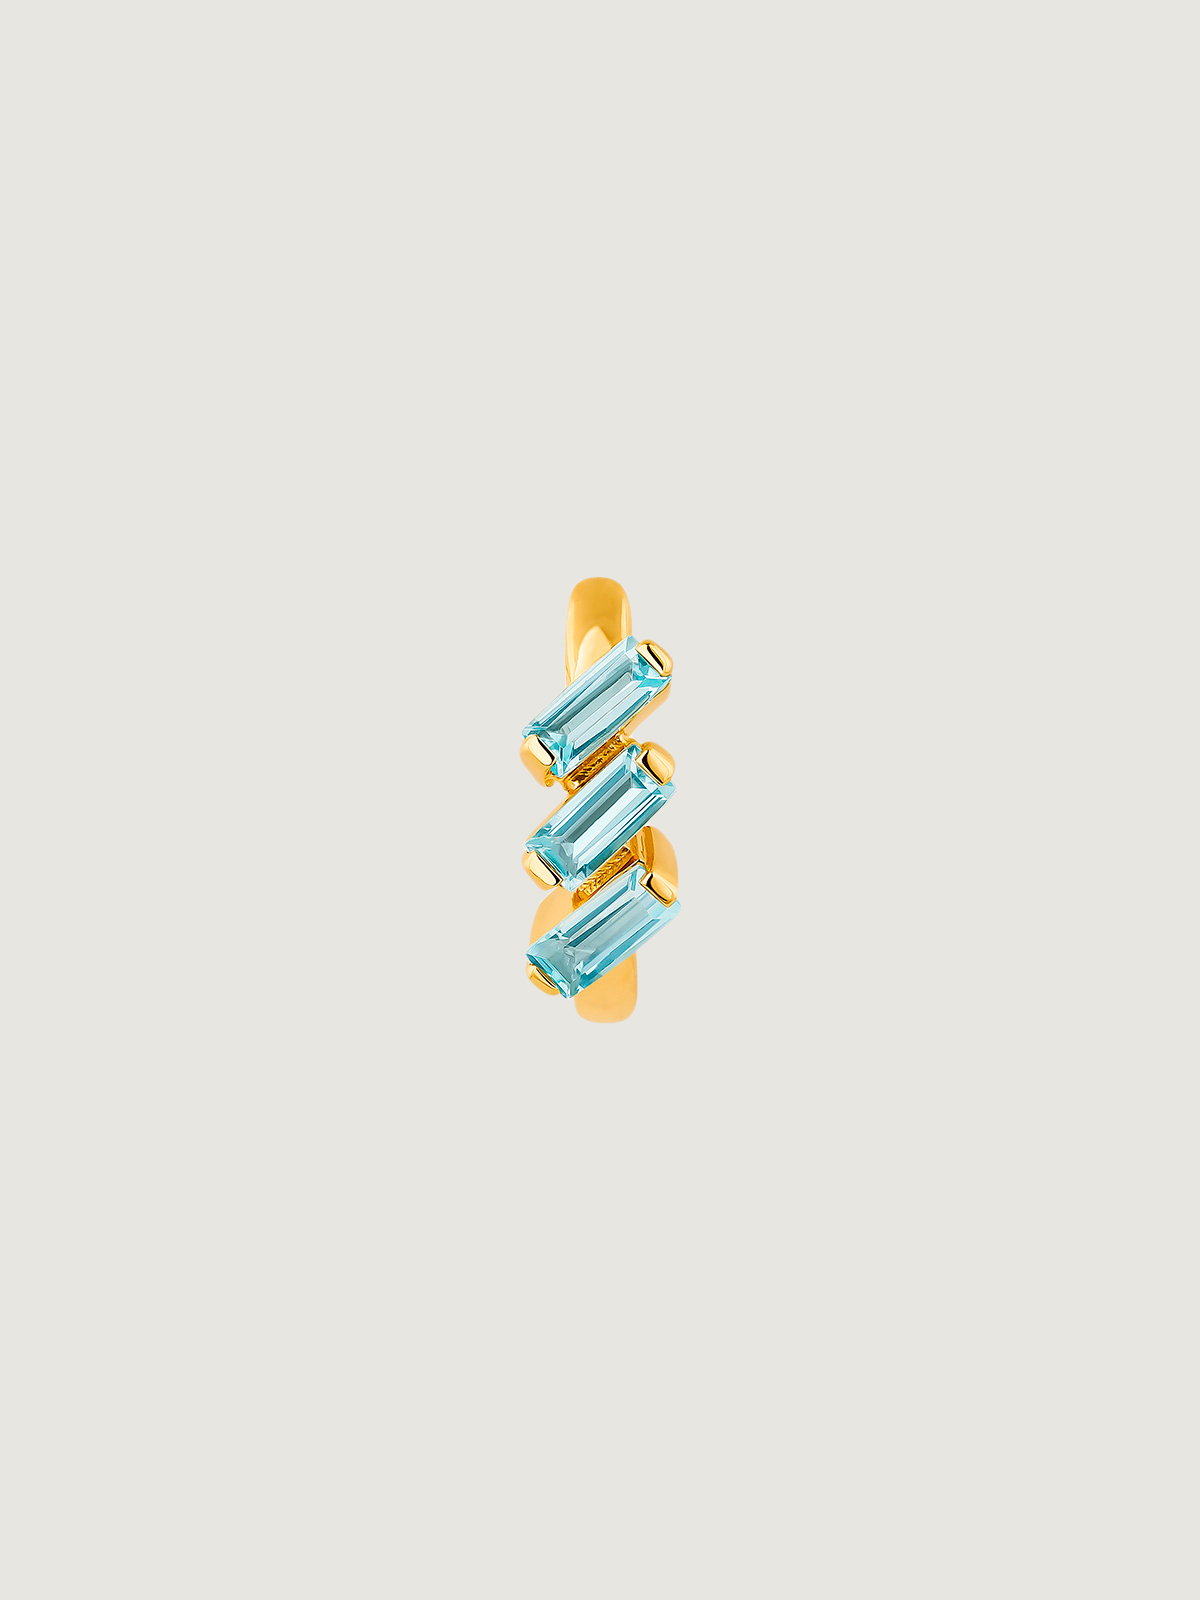 Individual hoop earring made of 925 silver, bathed in 18K yellow gold with sky blue topaz.